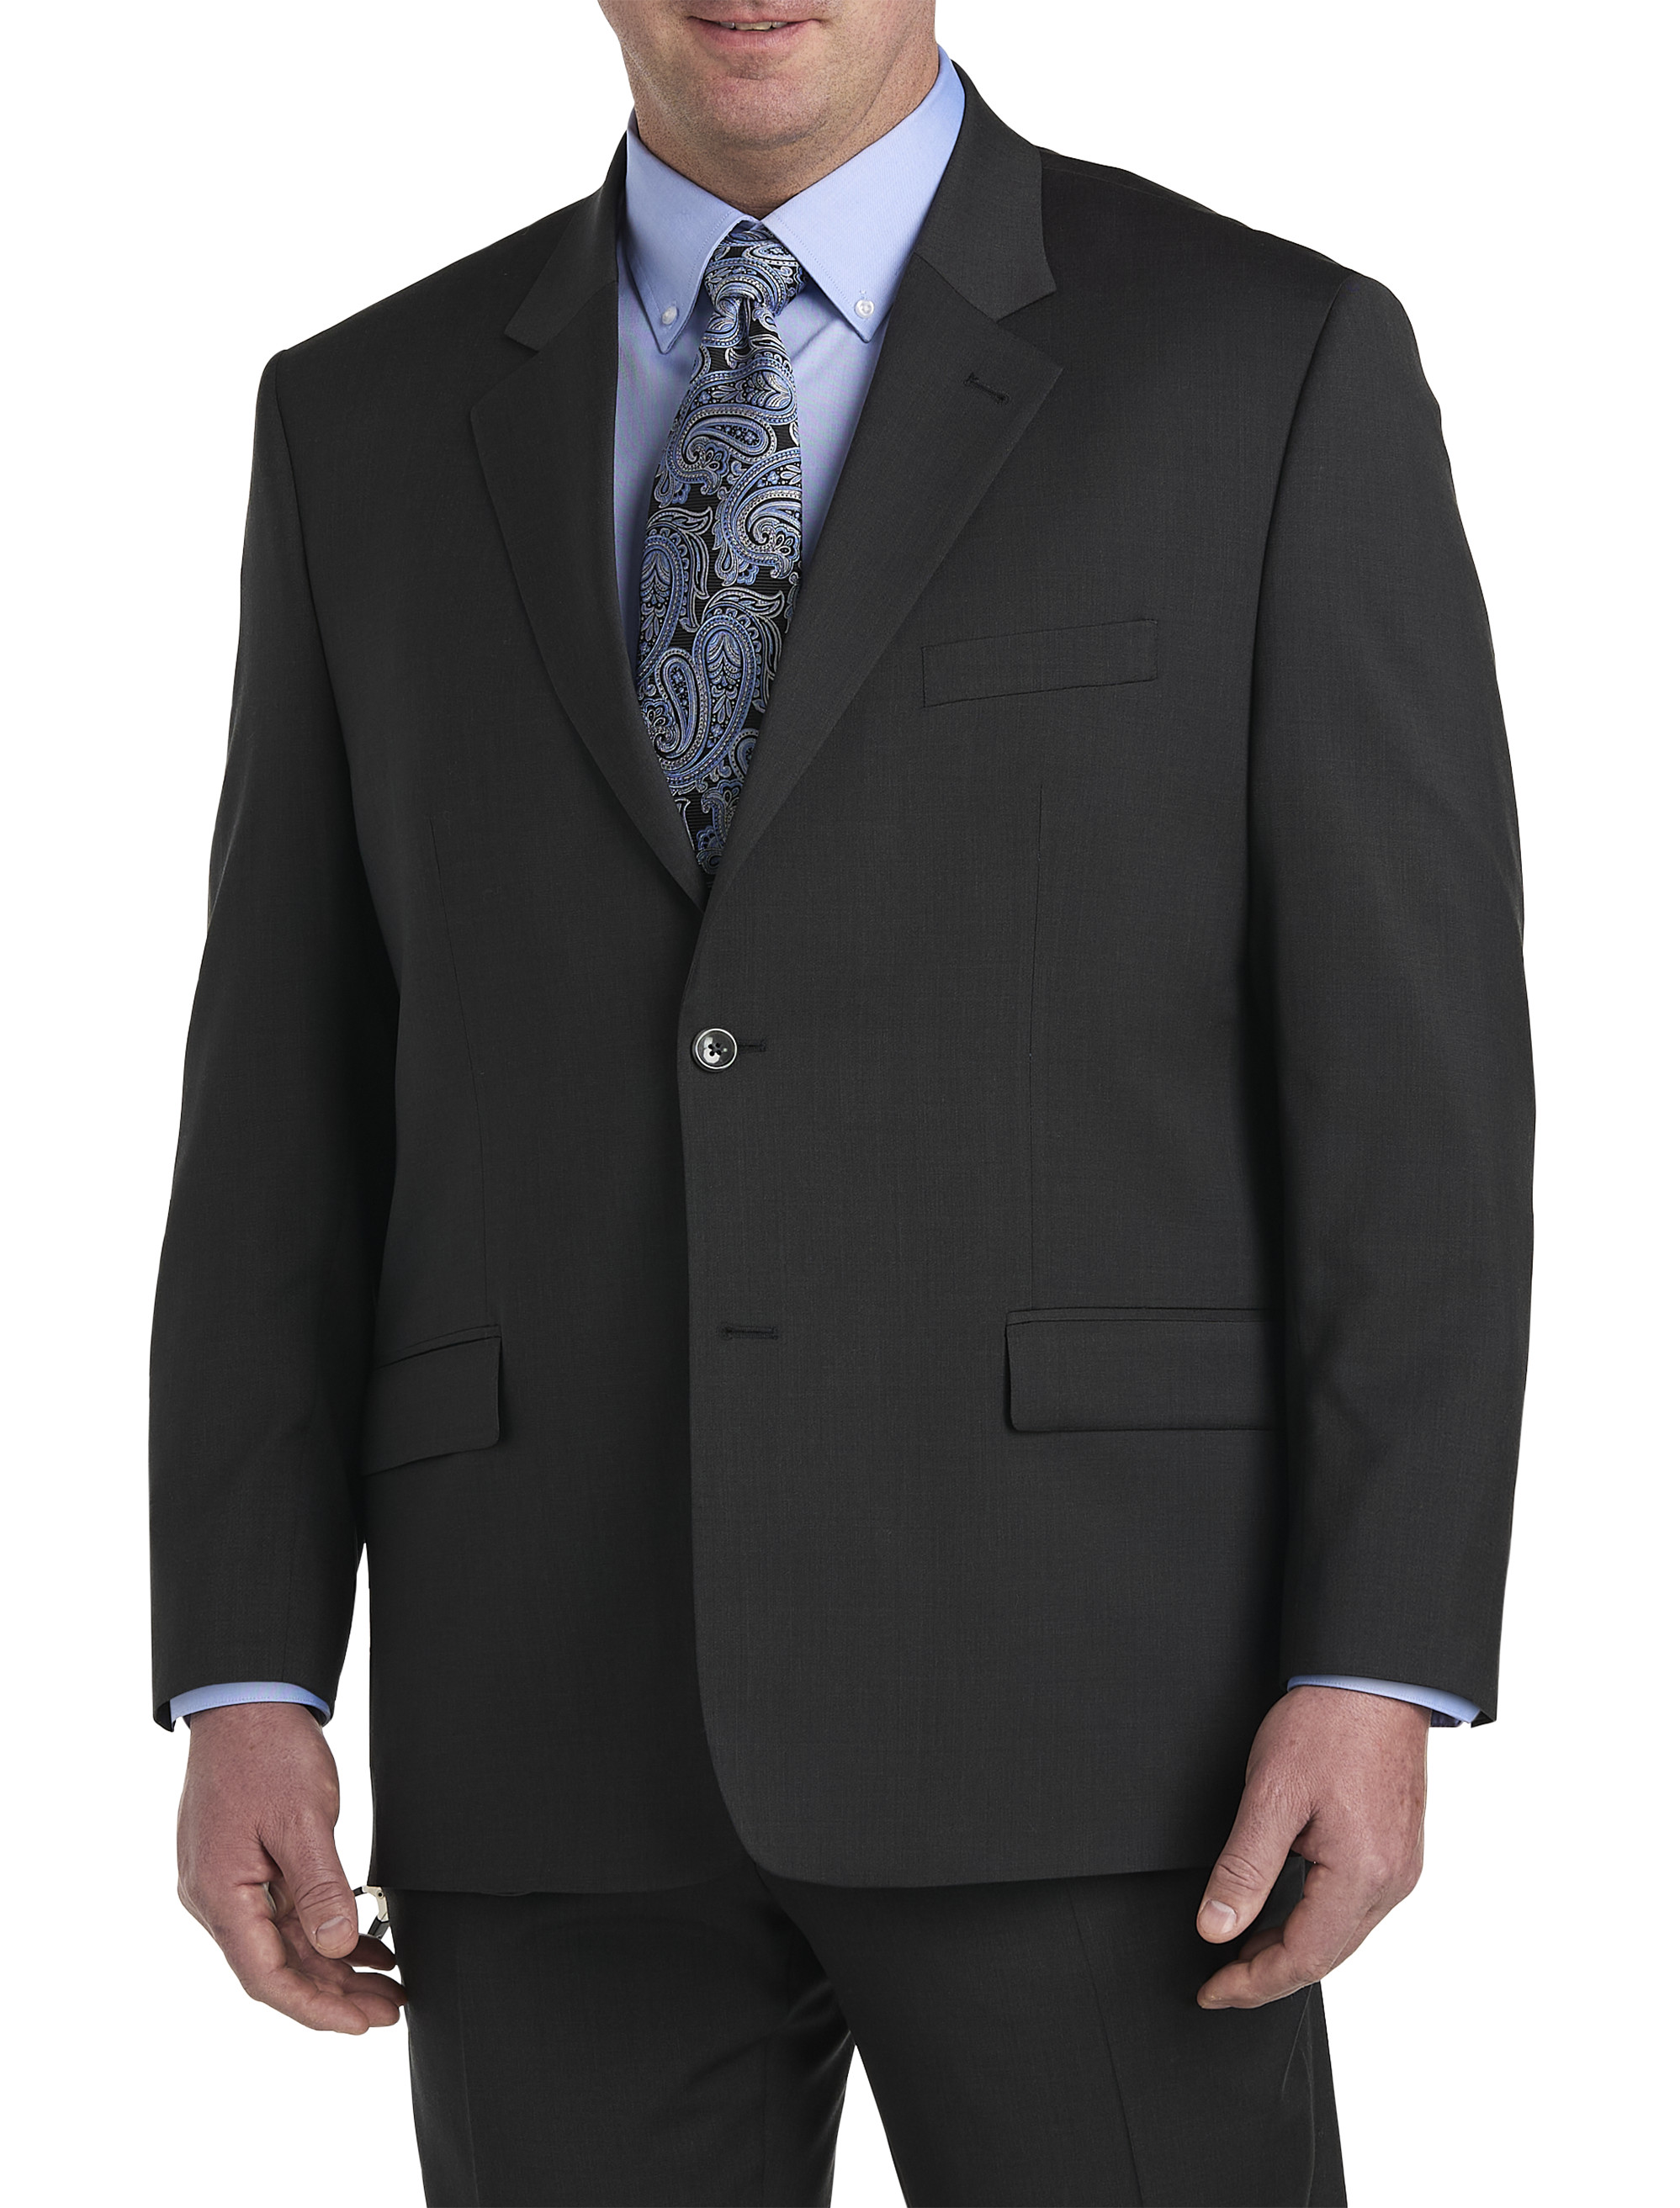 Jacket-Relaxer Suit Jacket